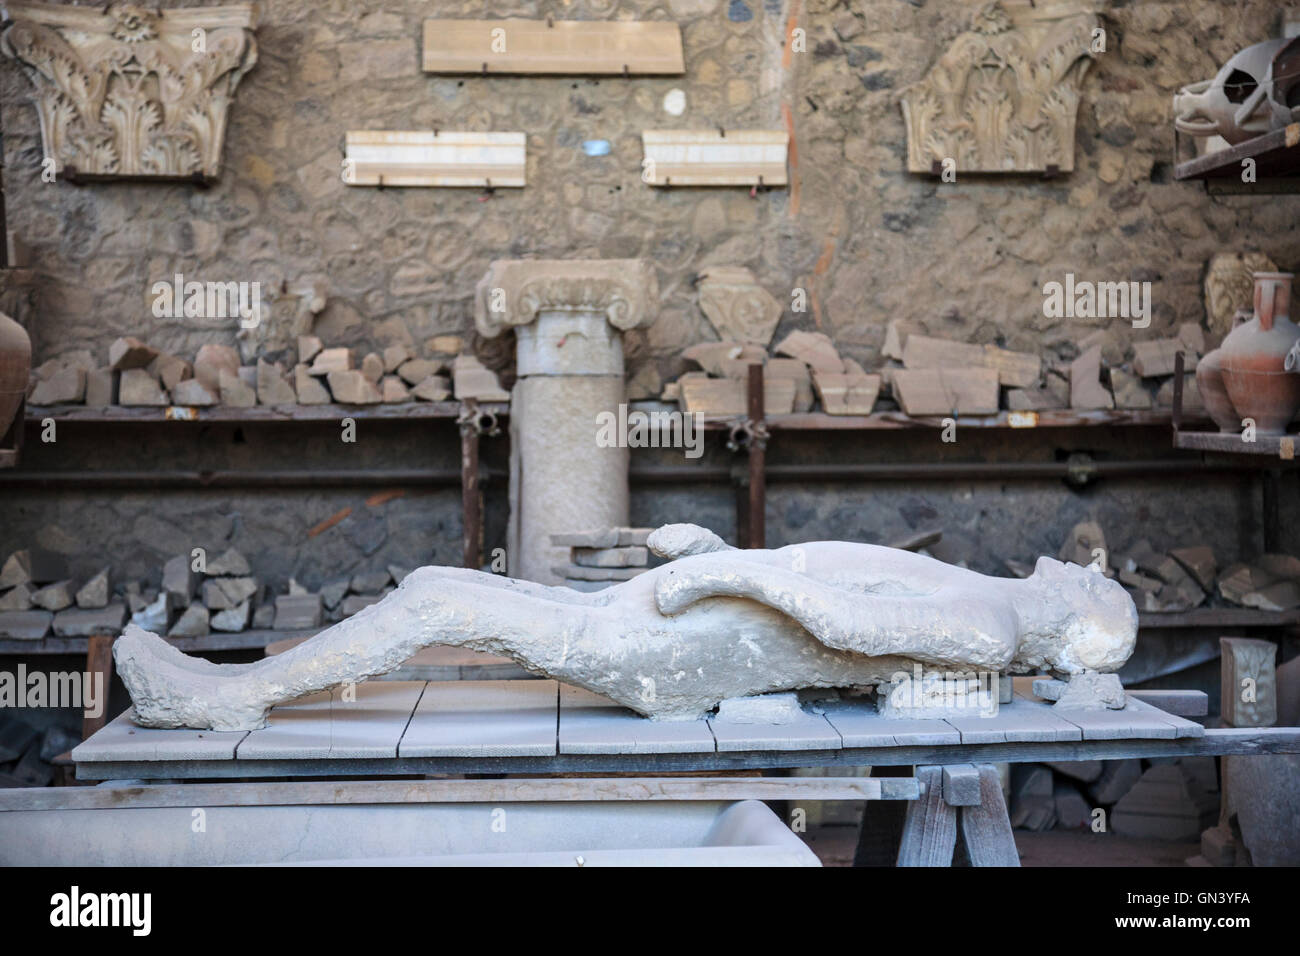 Plaster cast of a Roman buried in ash from the eruption of Vesuvius, Pompeii, Italy Stock Photo